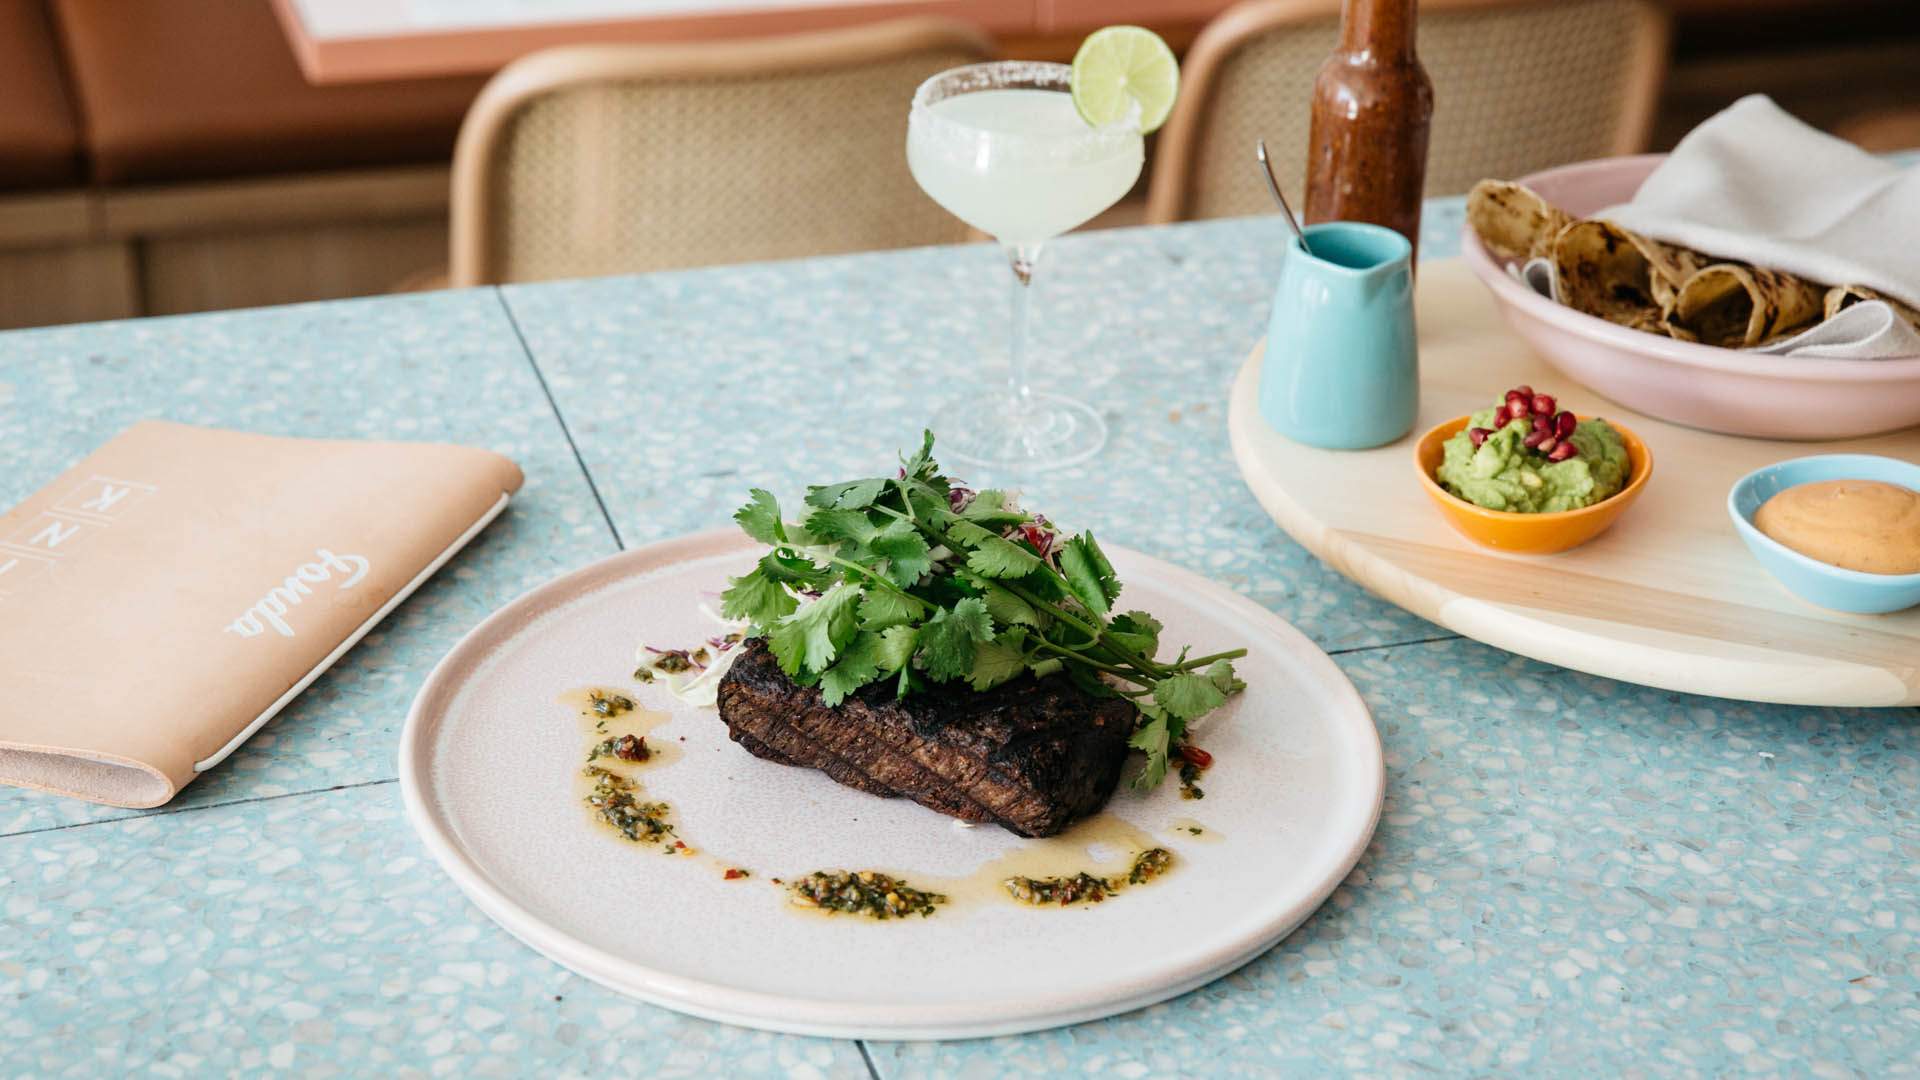 Melbourne's Fonda Mexican Has Just Launched Its First Sydney Venue